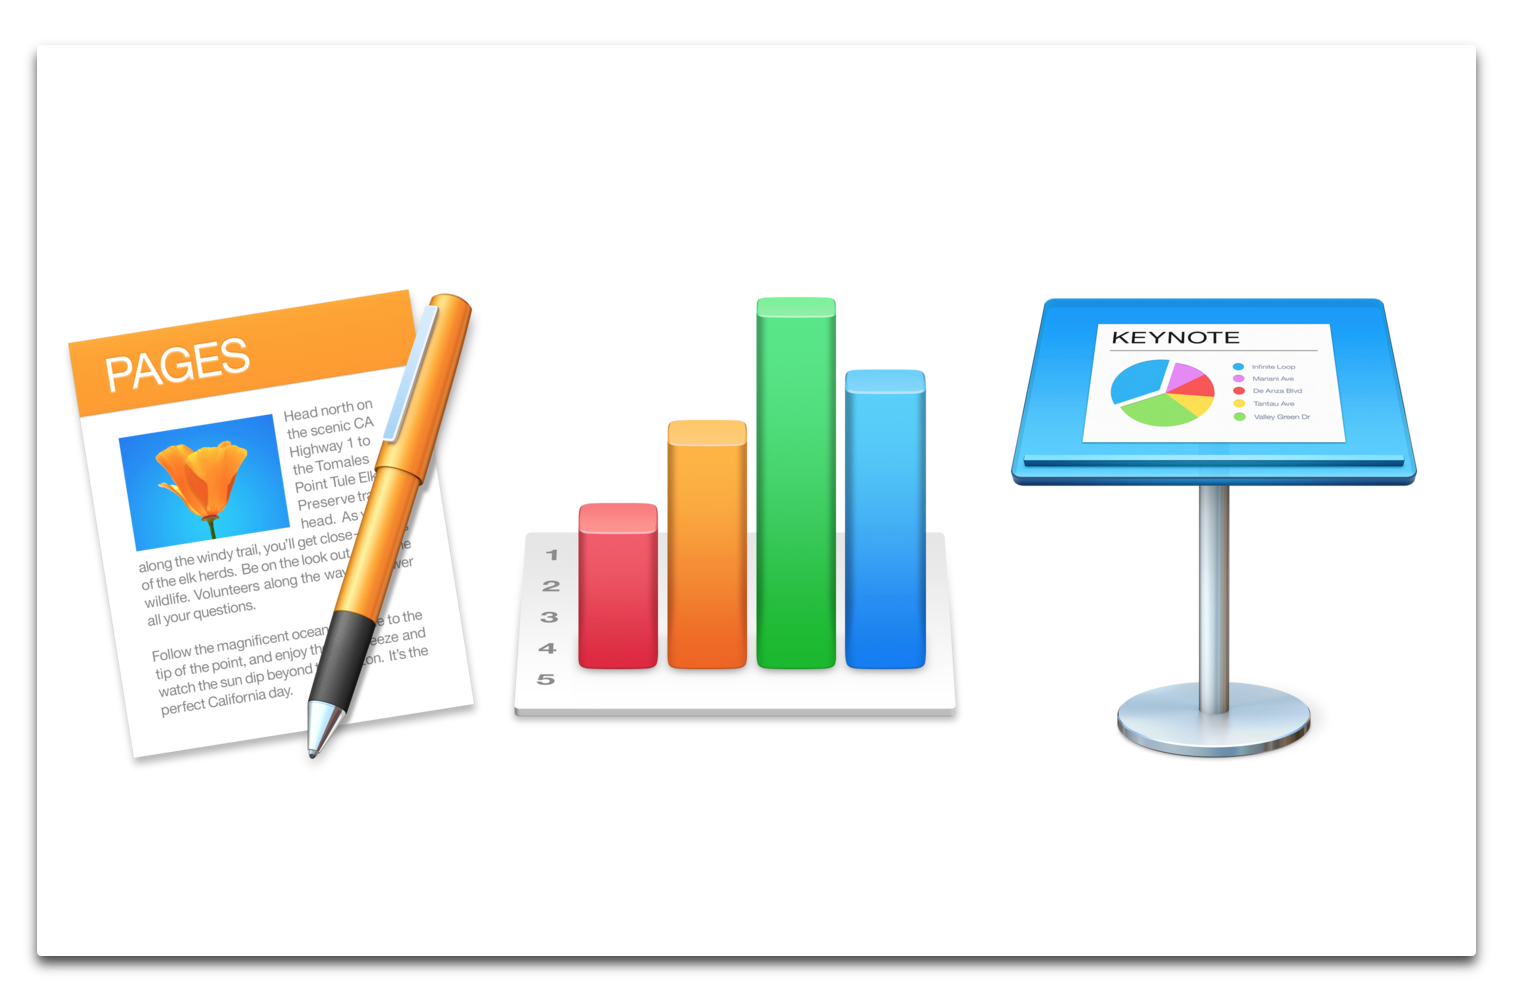 Apple、iWork for Macの「Pages 7.3」「Numbers 5.3」「Keynote 8.3」をリリース